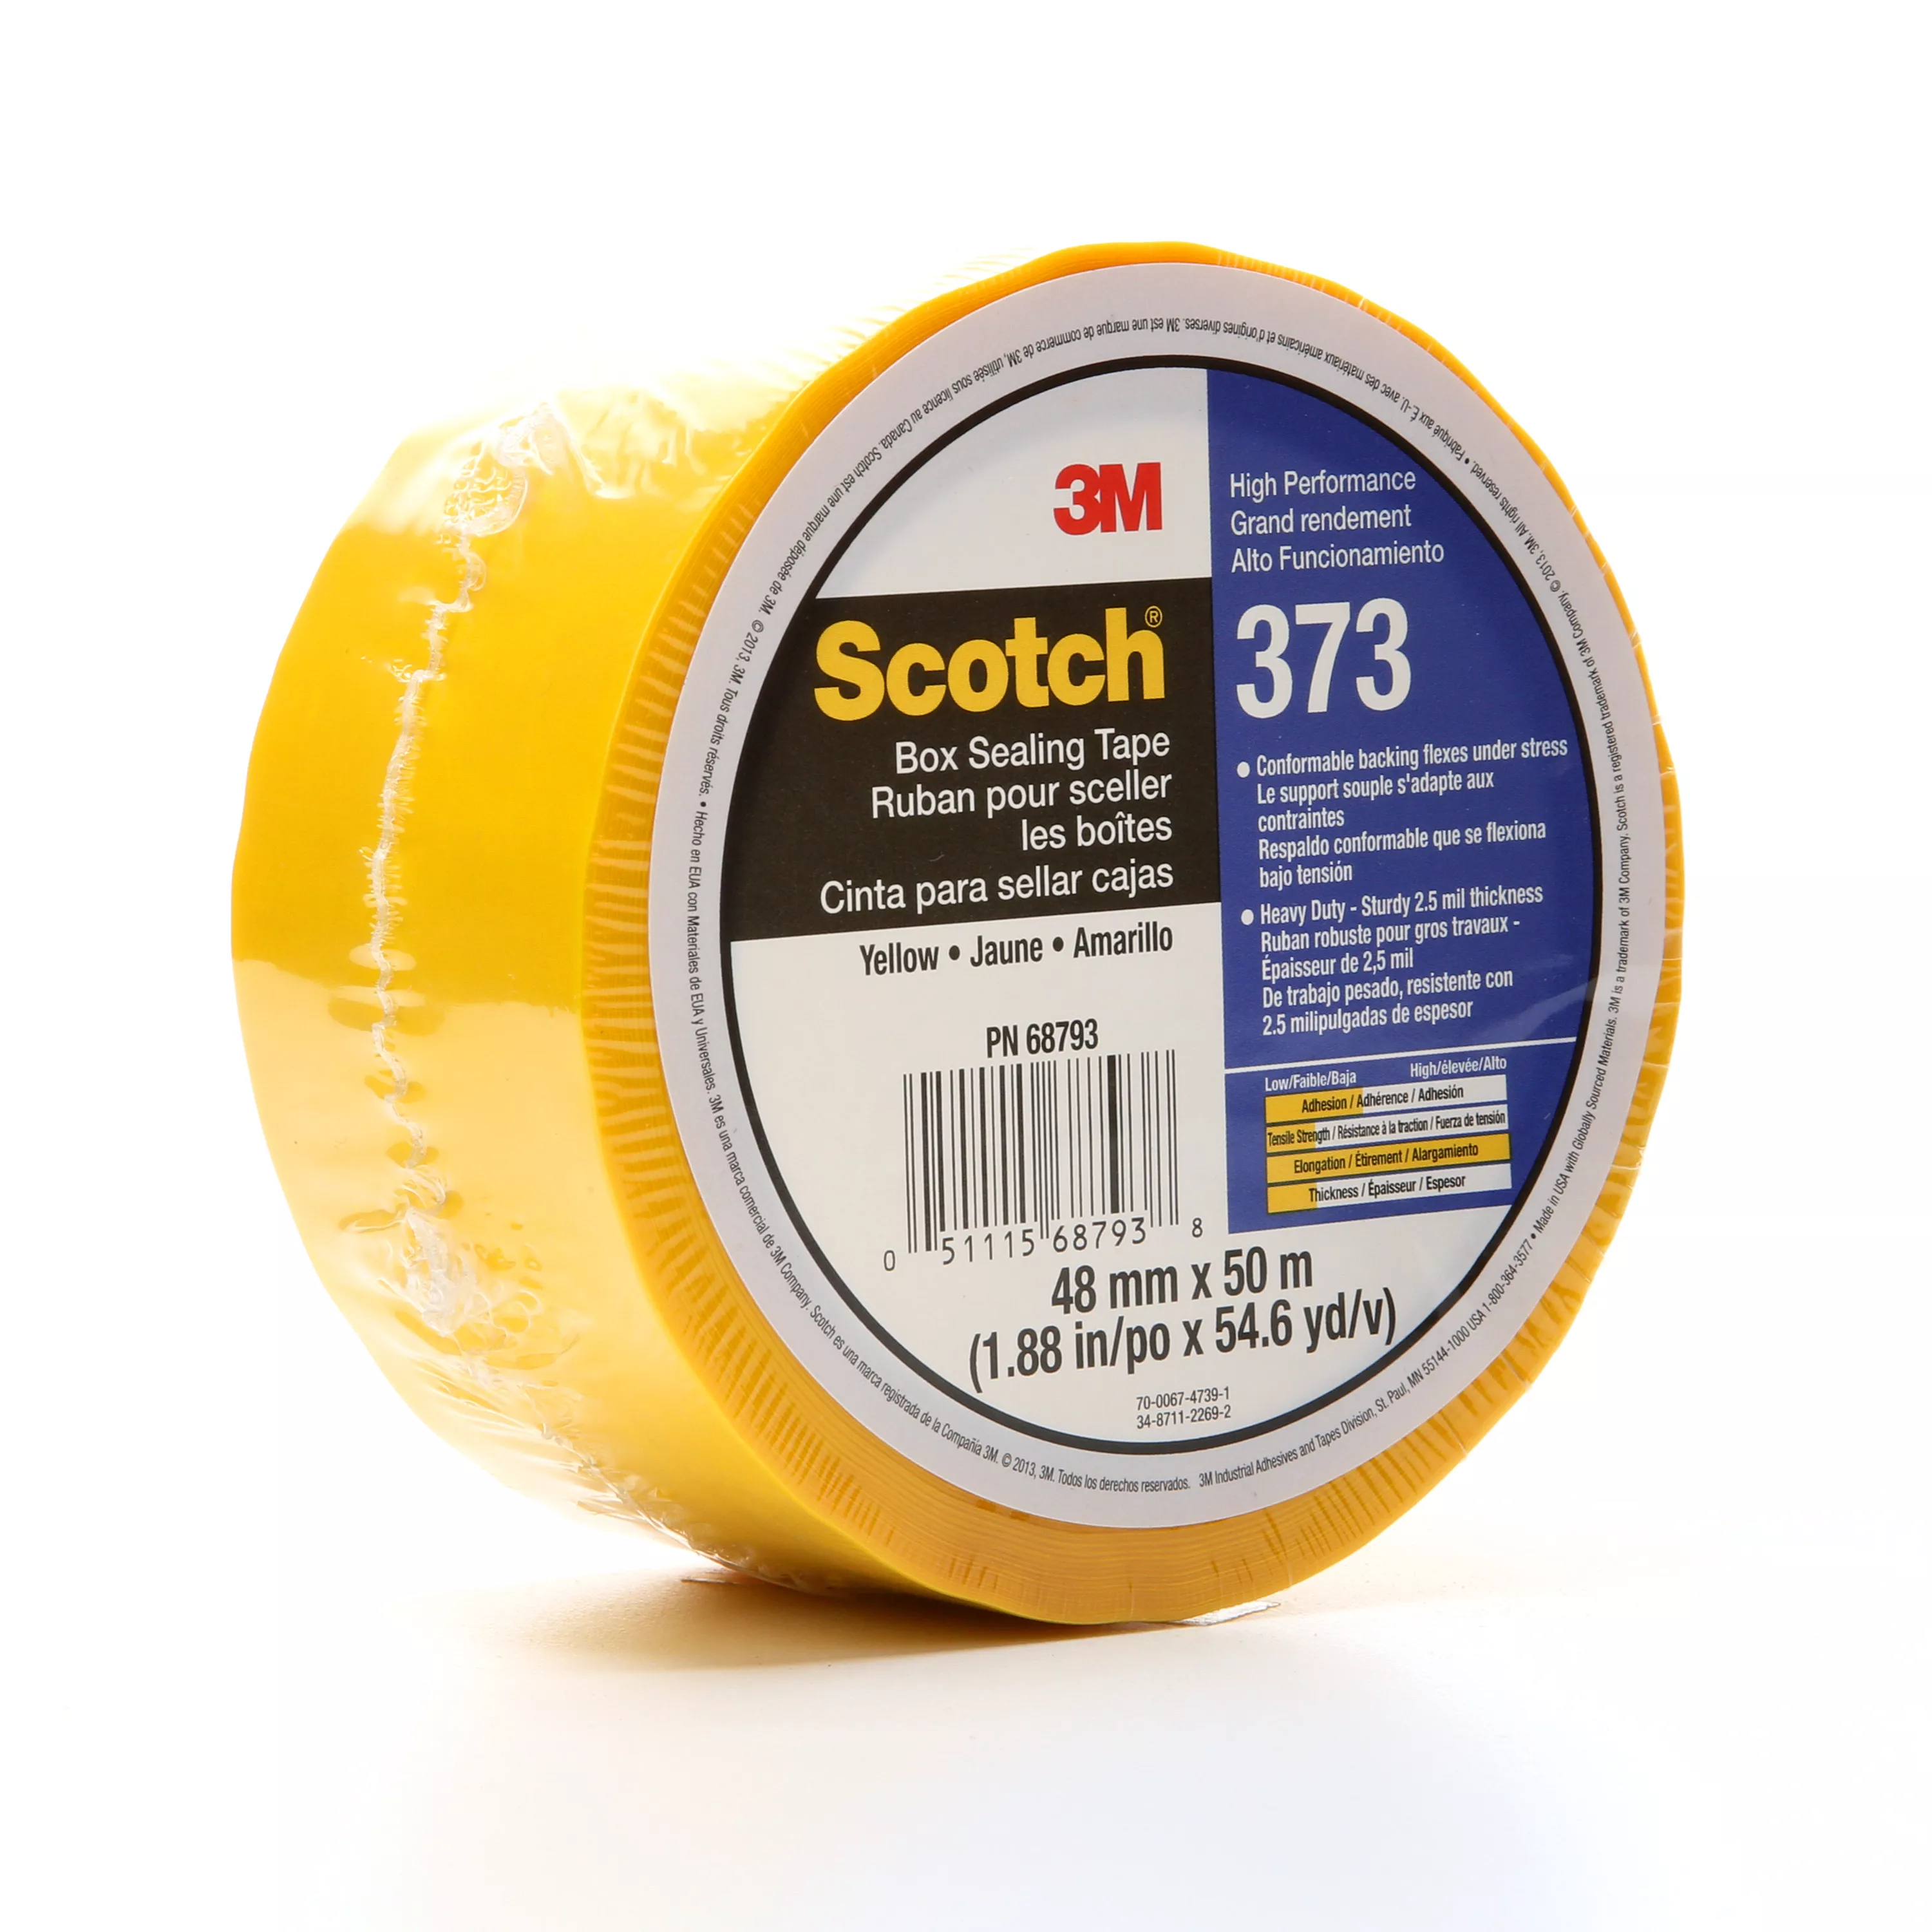 Scotch® Box Sealing Tape 373, Yellow, 48 mm x 50 m, 36/Case,
Individually Wrapped Conveniently Packaged